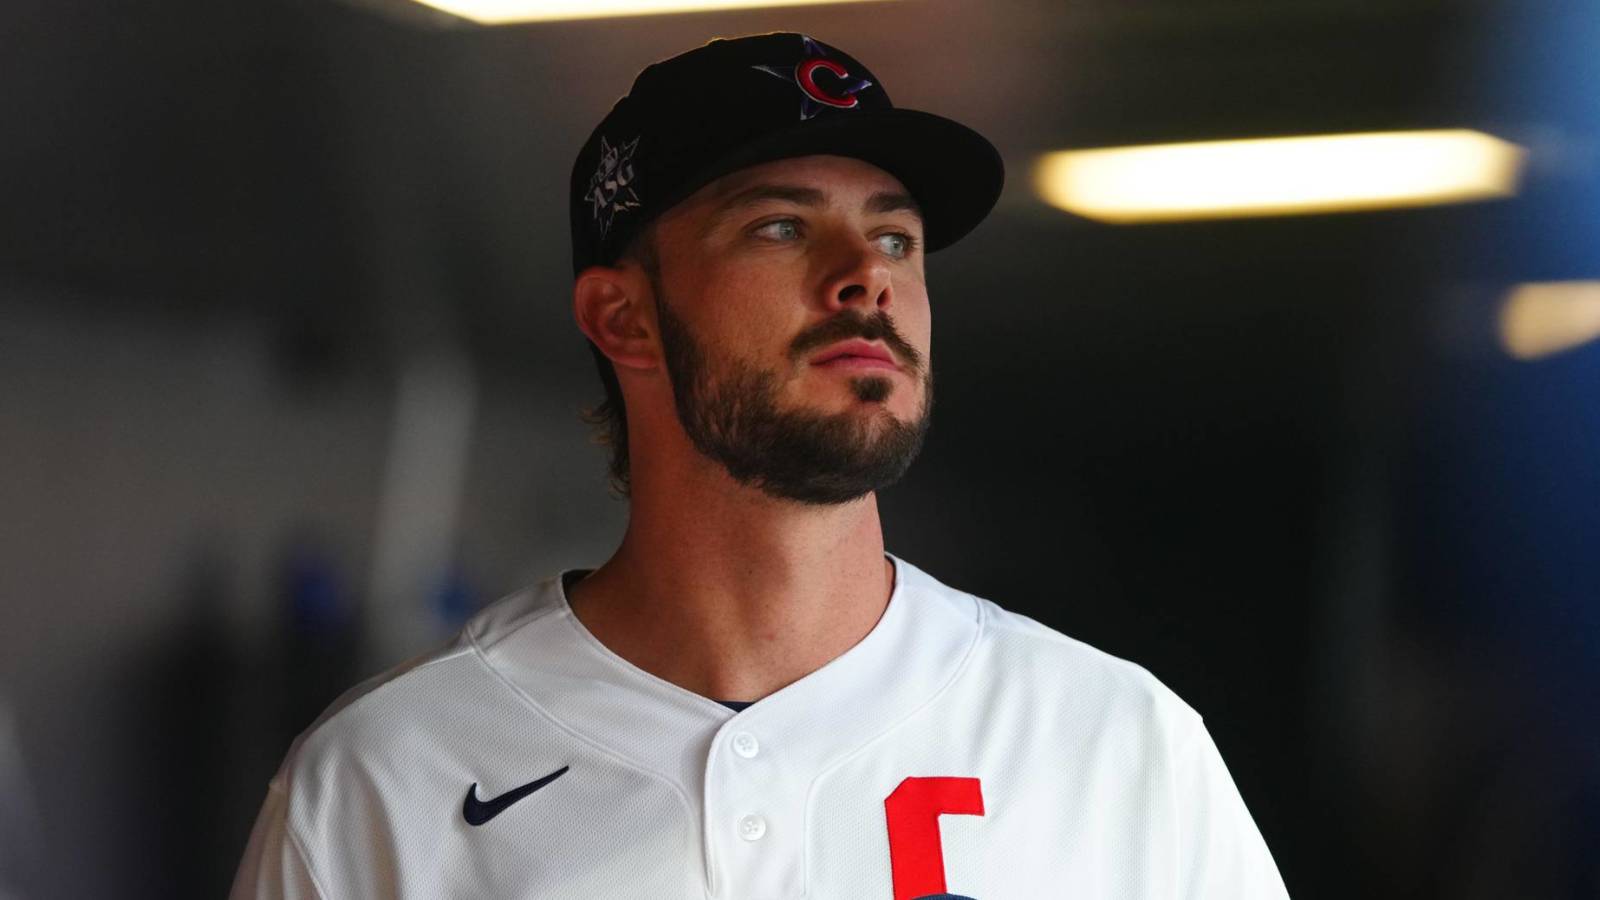 Kris Bryant traded to Giants as Cubs blow up roster